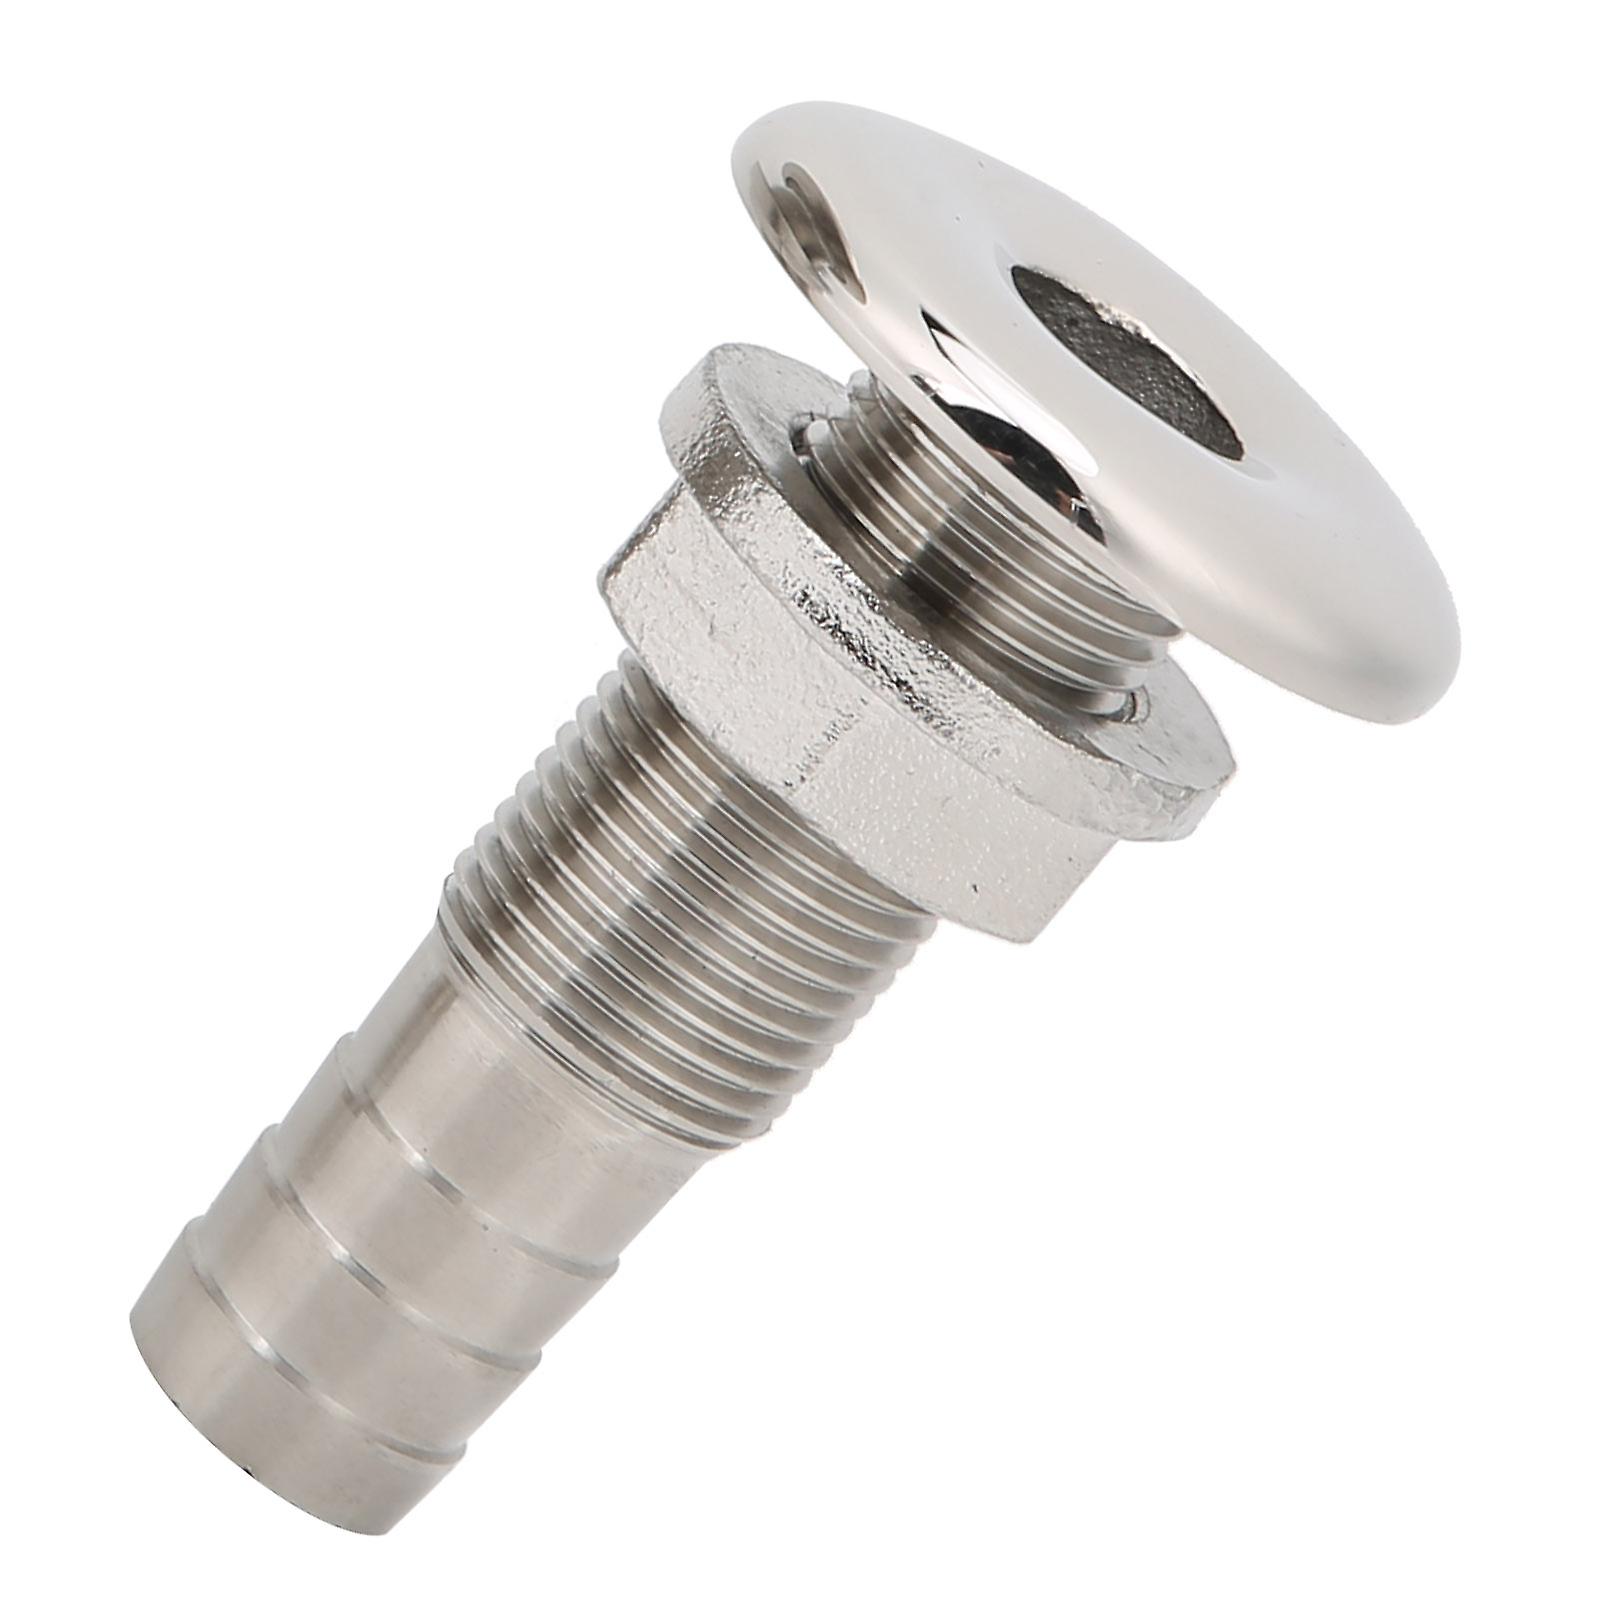 Outdoor Stainless Steel Water Outlet Port Boat Body Bottom Yacht Bilge Drain Vent Accessorymjs0223/8in